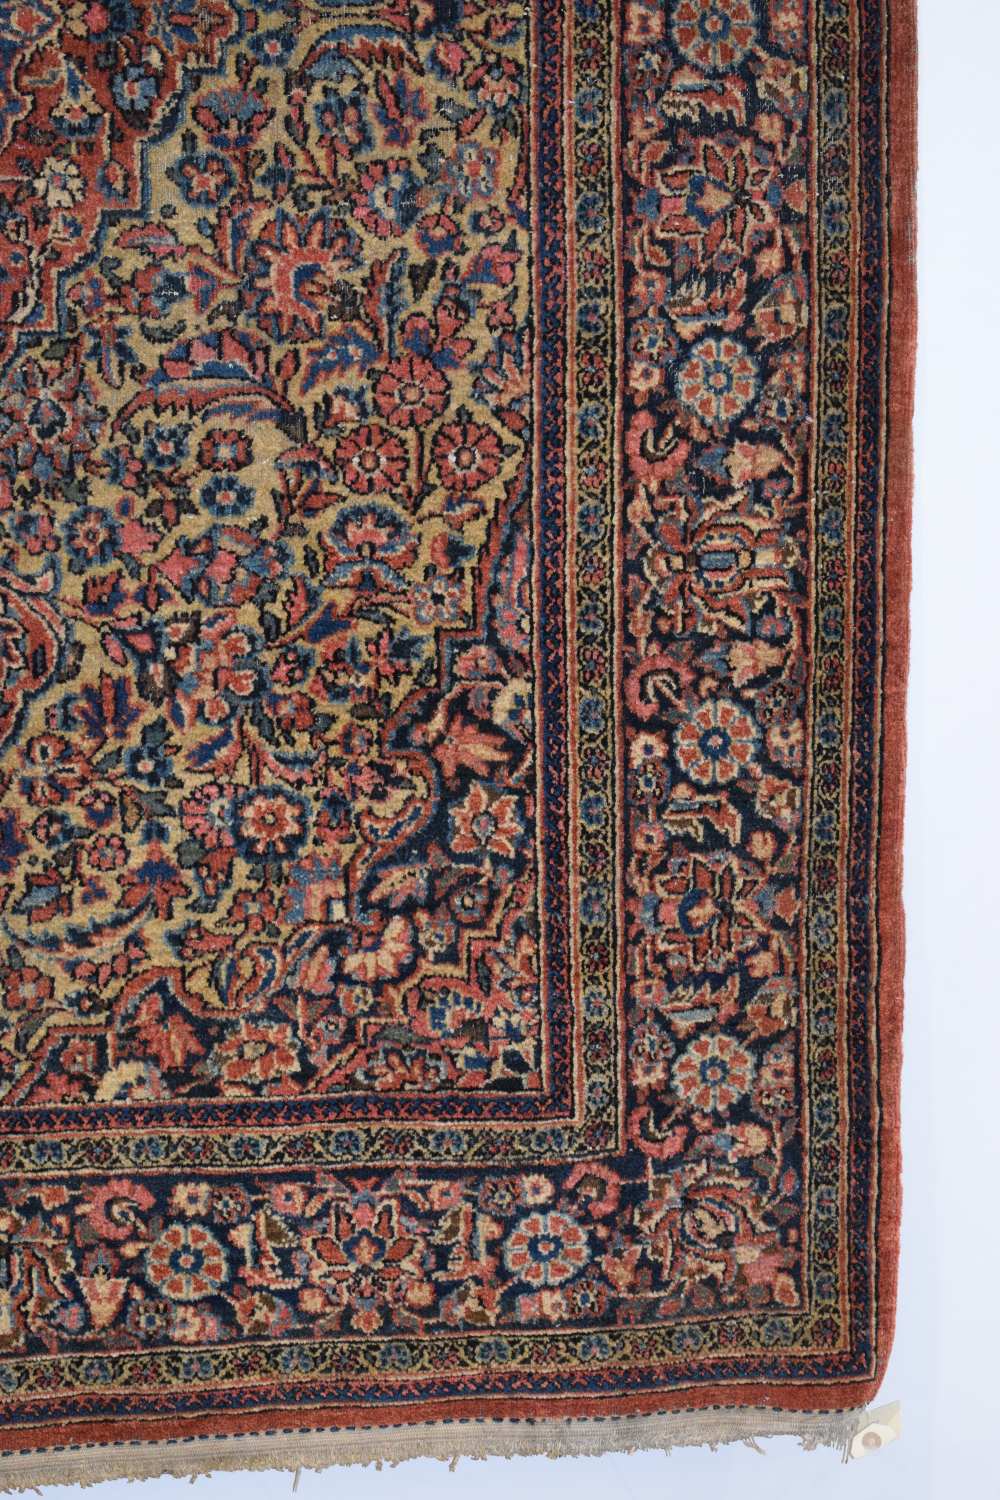 Kashan rug, west Persia, circa 1920s, 7ft. x 4ft. 2in. 2.13m. x 1.27m. Overall wear with some - Image 2 of 9